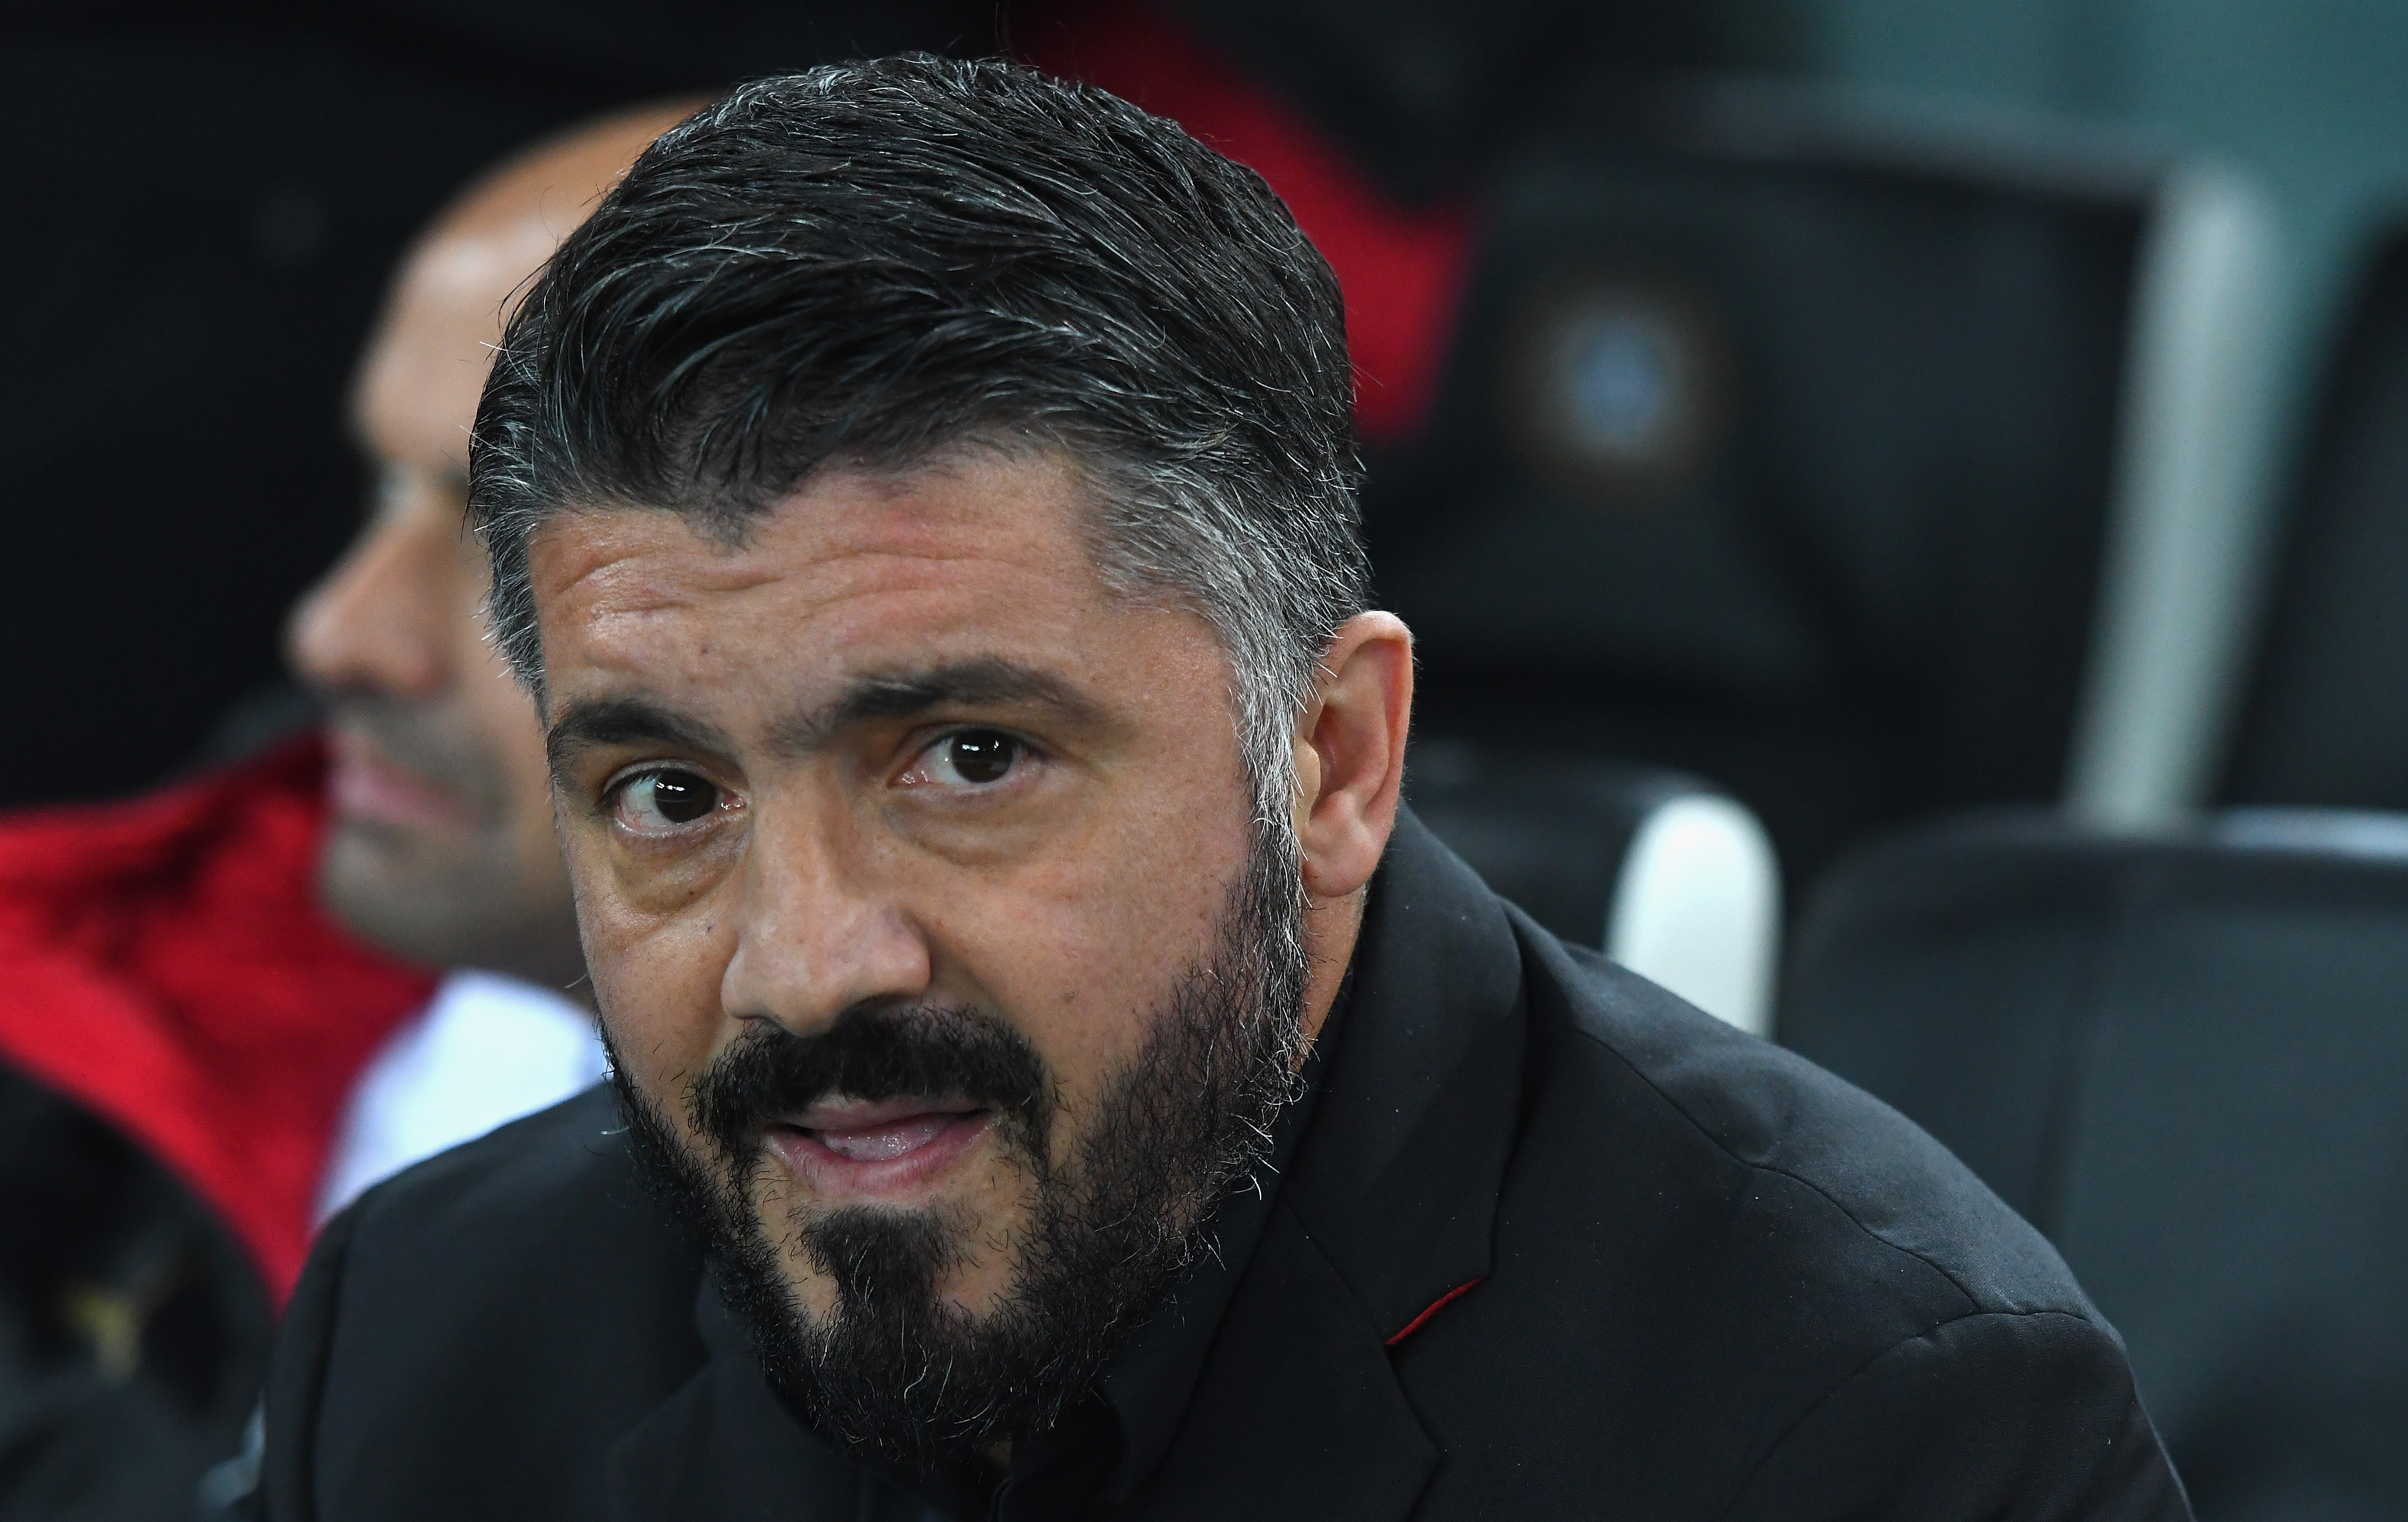 UDINE, ITALY - NOVEMBER 04: Gennaro Gattuso head coach of AC Milan looks on before the Serie A match between Udinese and AC Milan at Stadio Friuli on November 4, 2018 in Udine, Italy. (Photo by Alessandro Sabattini/Getty Images)